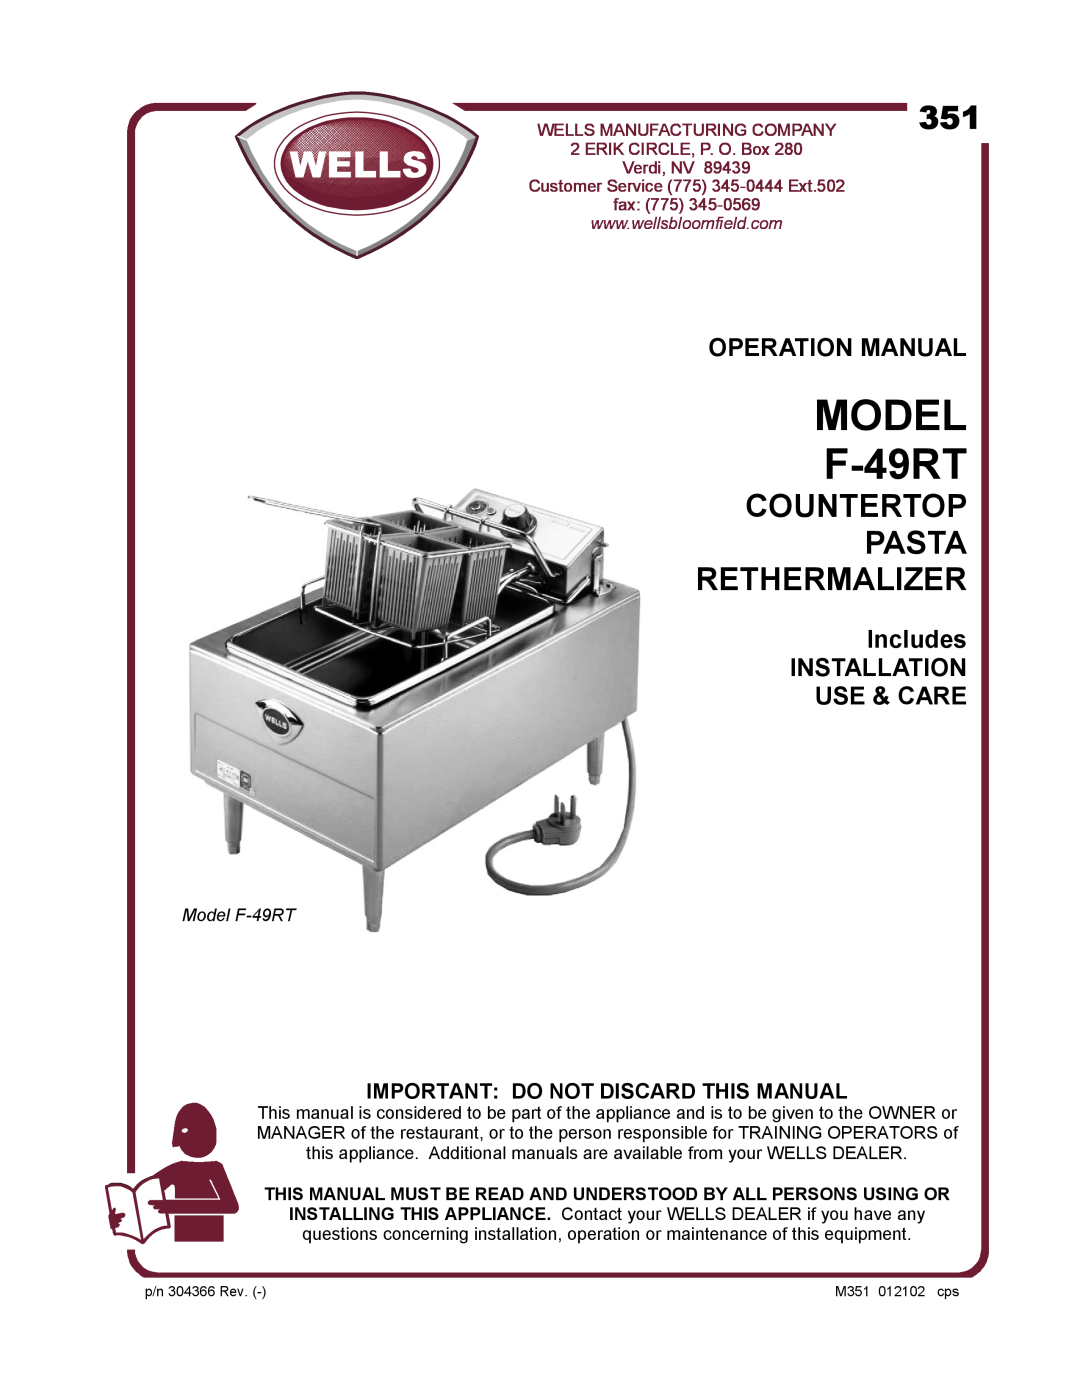 Wells operation manual Includes INSTALLATION USE & CARE, Important Do Not Discard This Manual, MODEL F-49RT, Verdi, NV 